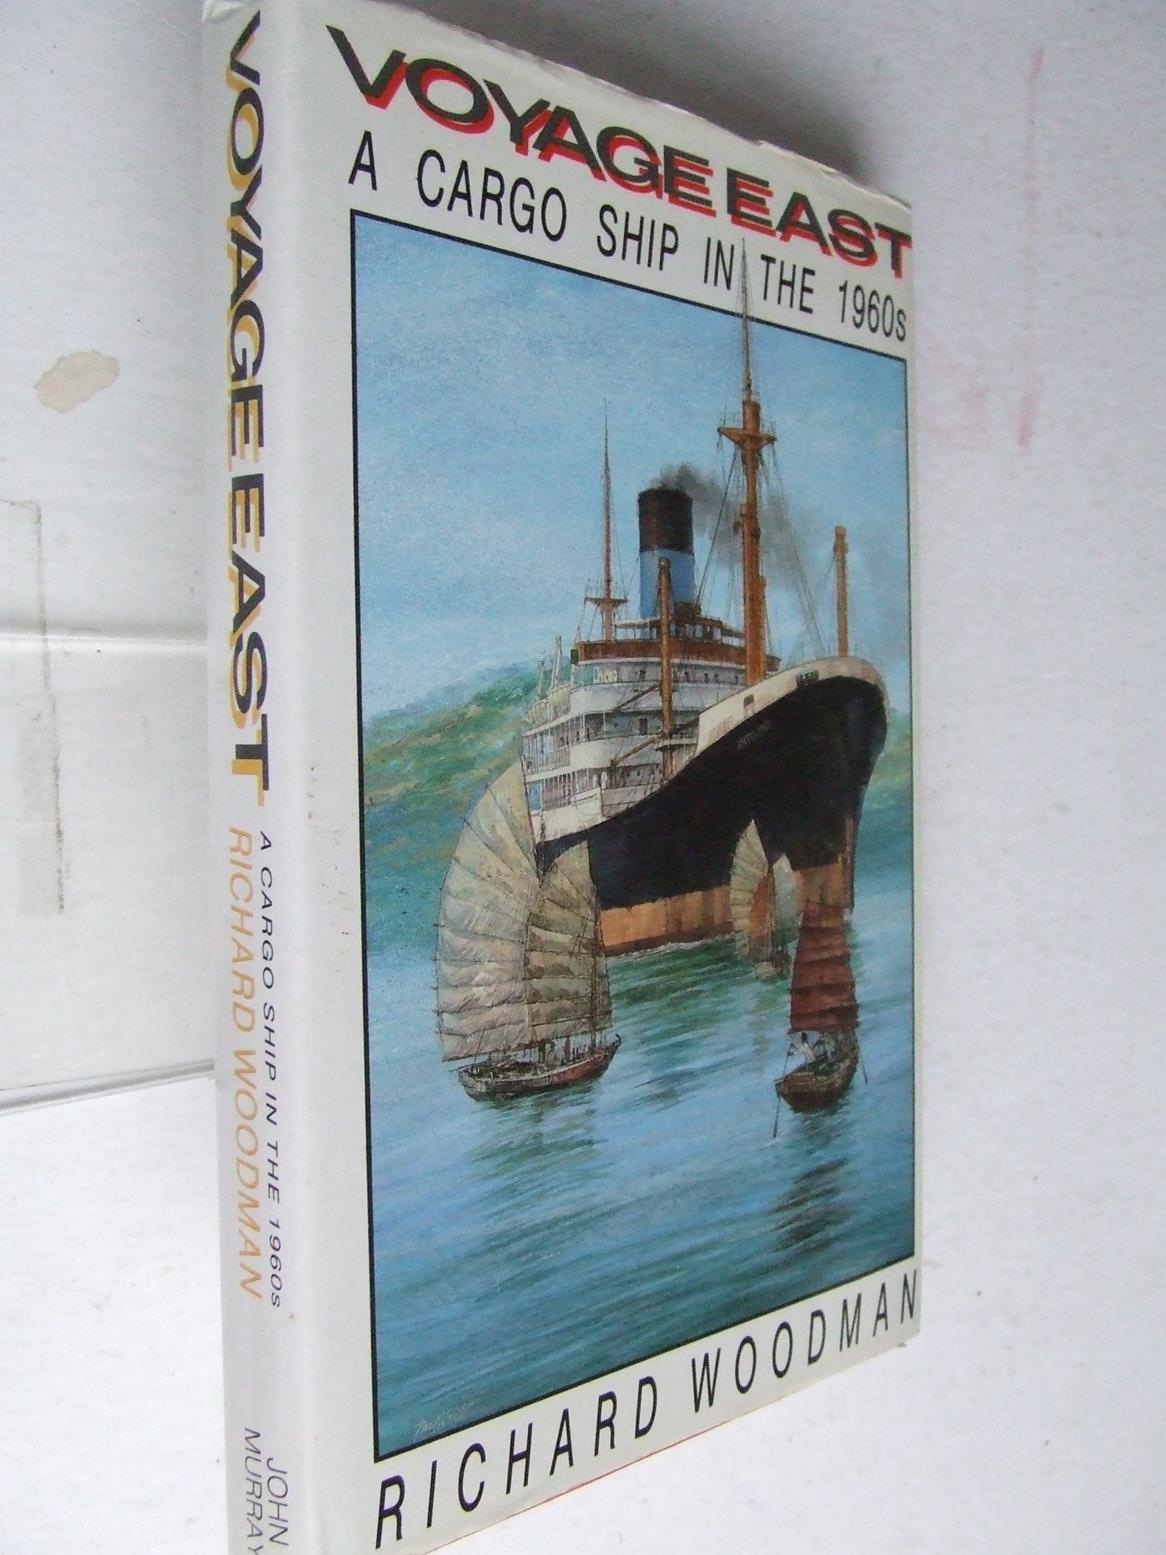 Voyage East, a cargo ship in the 1960's